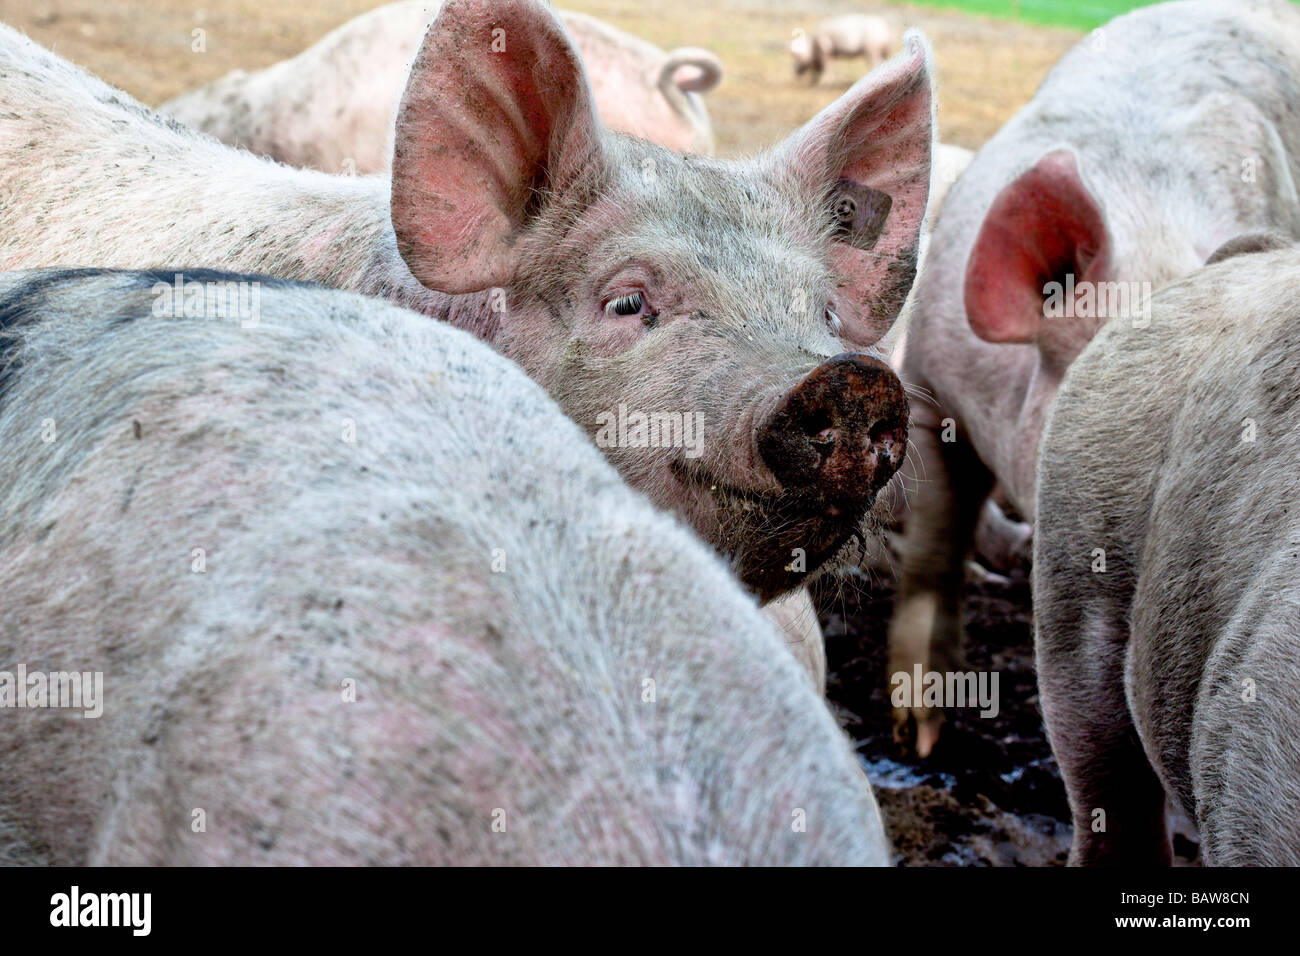 Stand out in a crowd. A young pig looks at the camera between other pigs. Charles Lupica Stock Photo